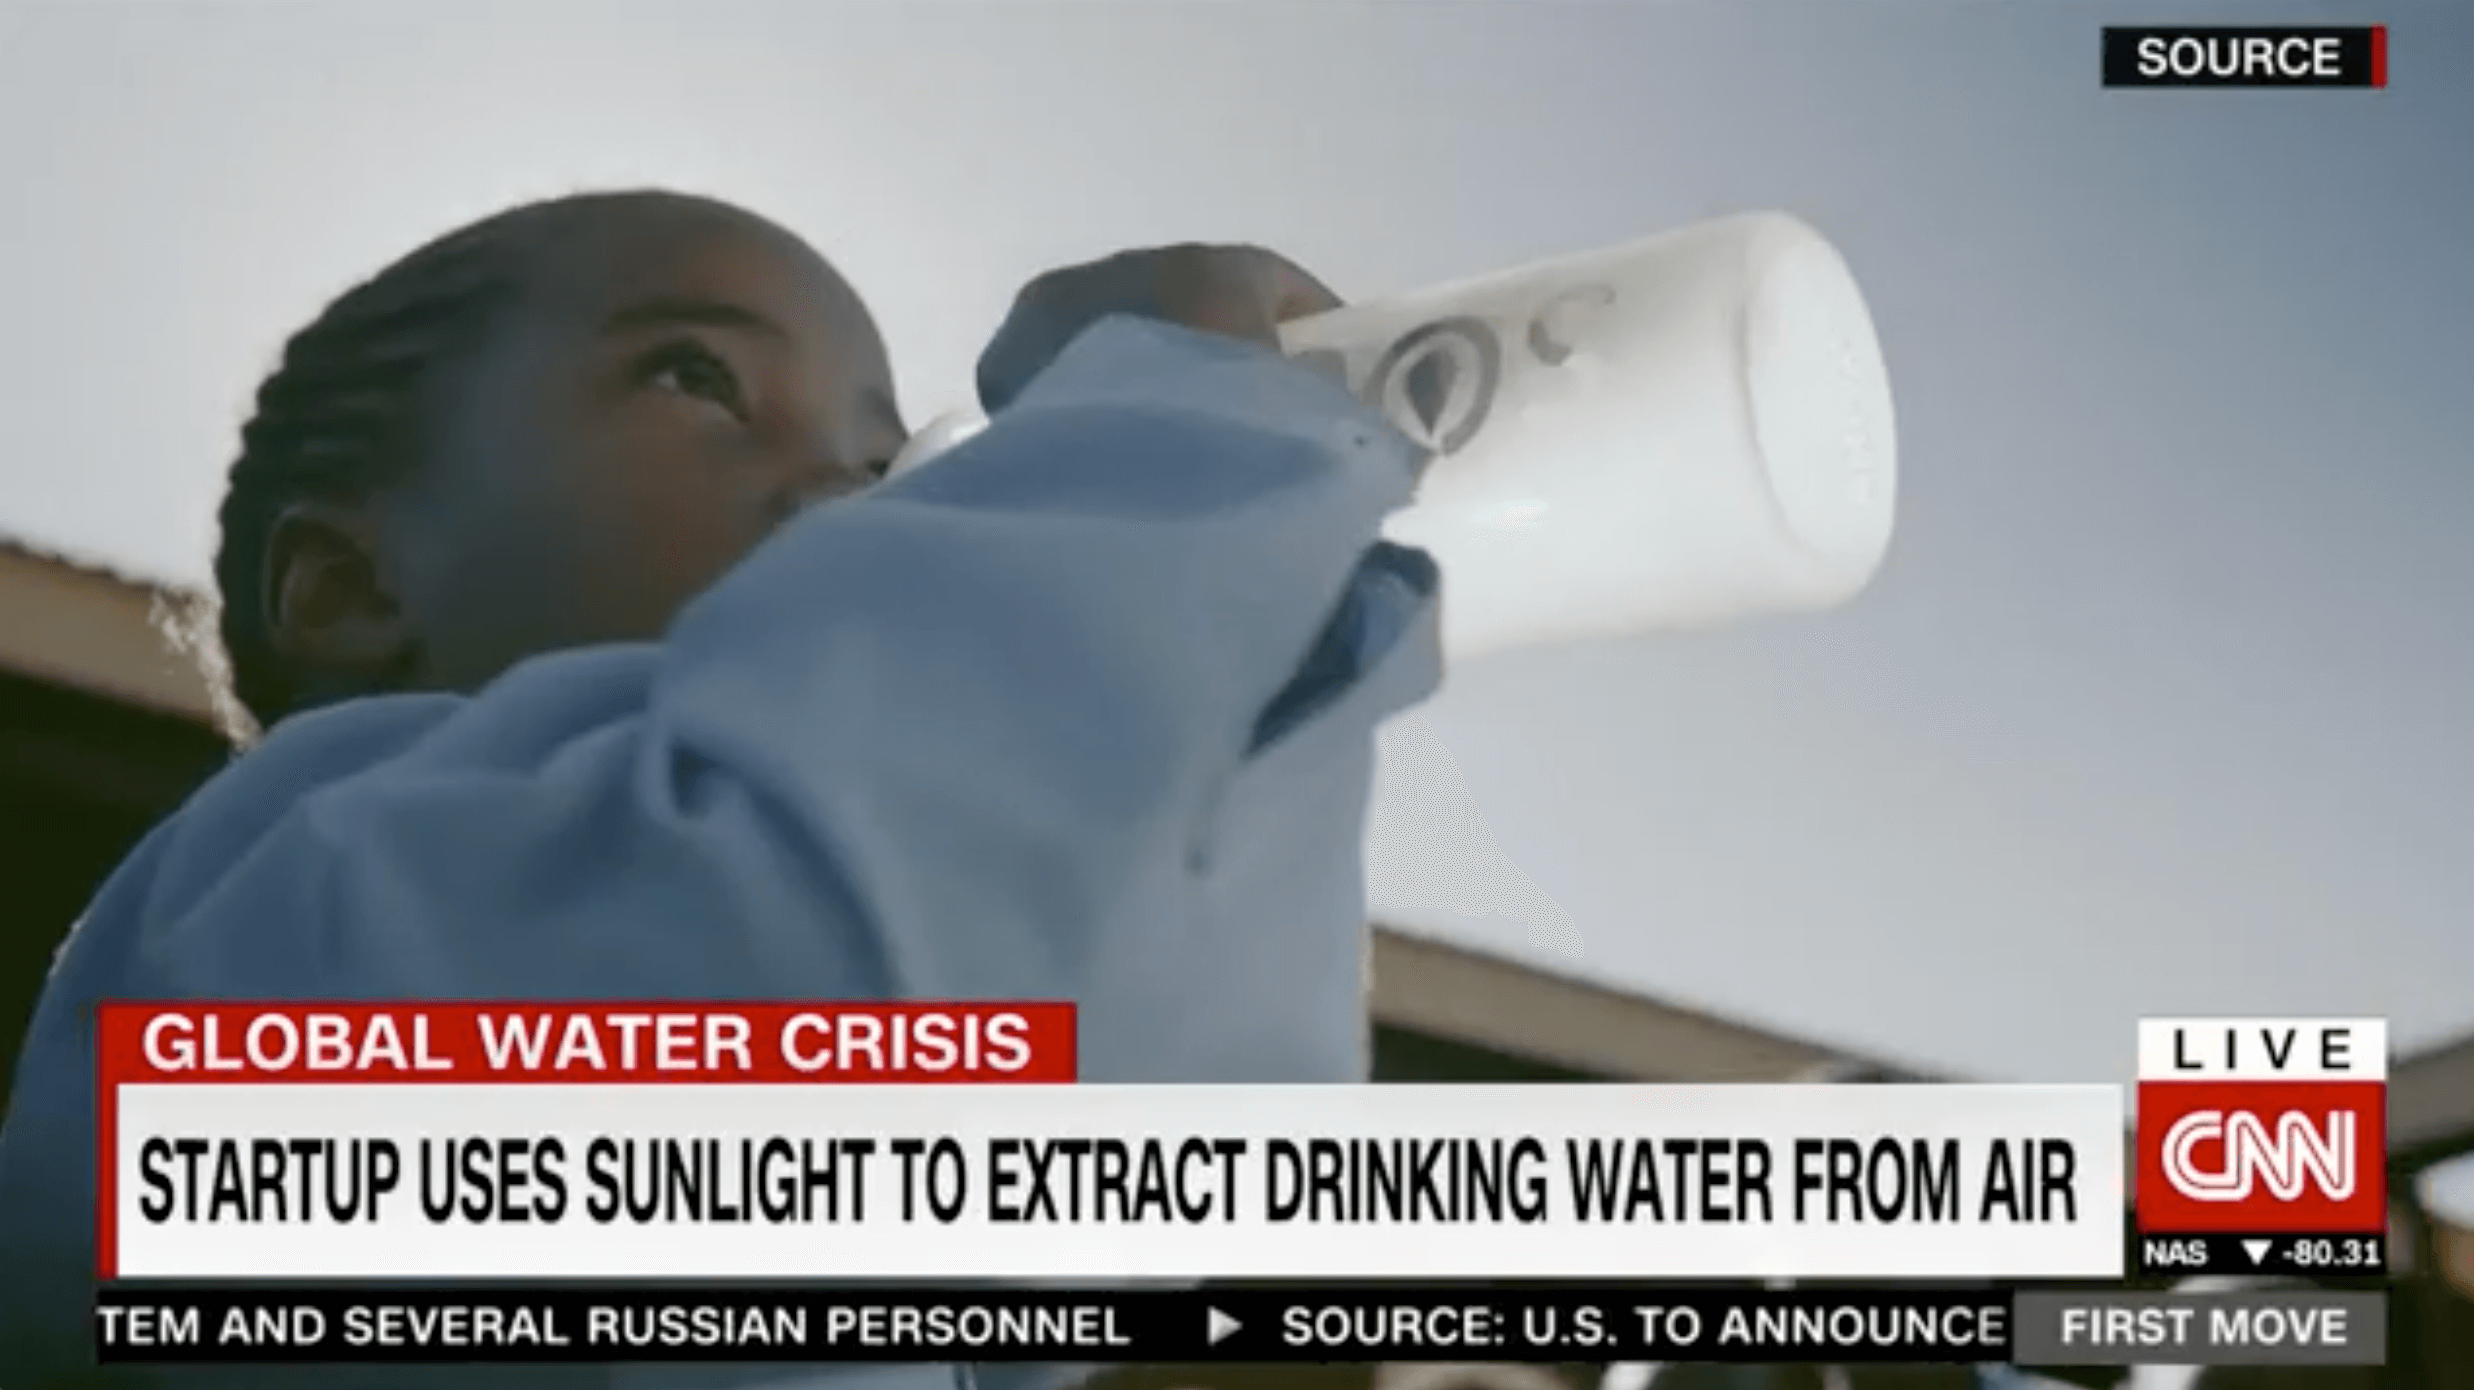 Startup uses sunlight to extract drinking water from air Image